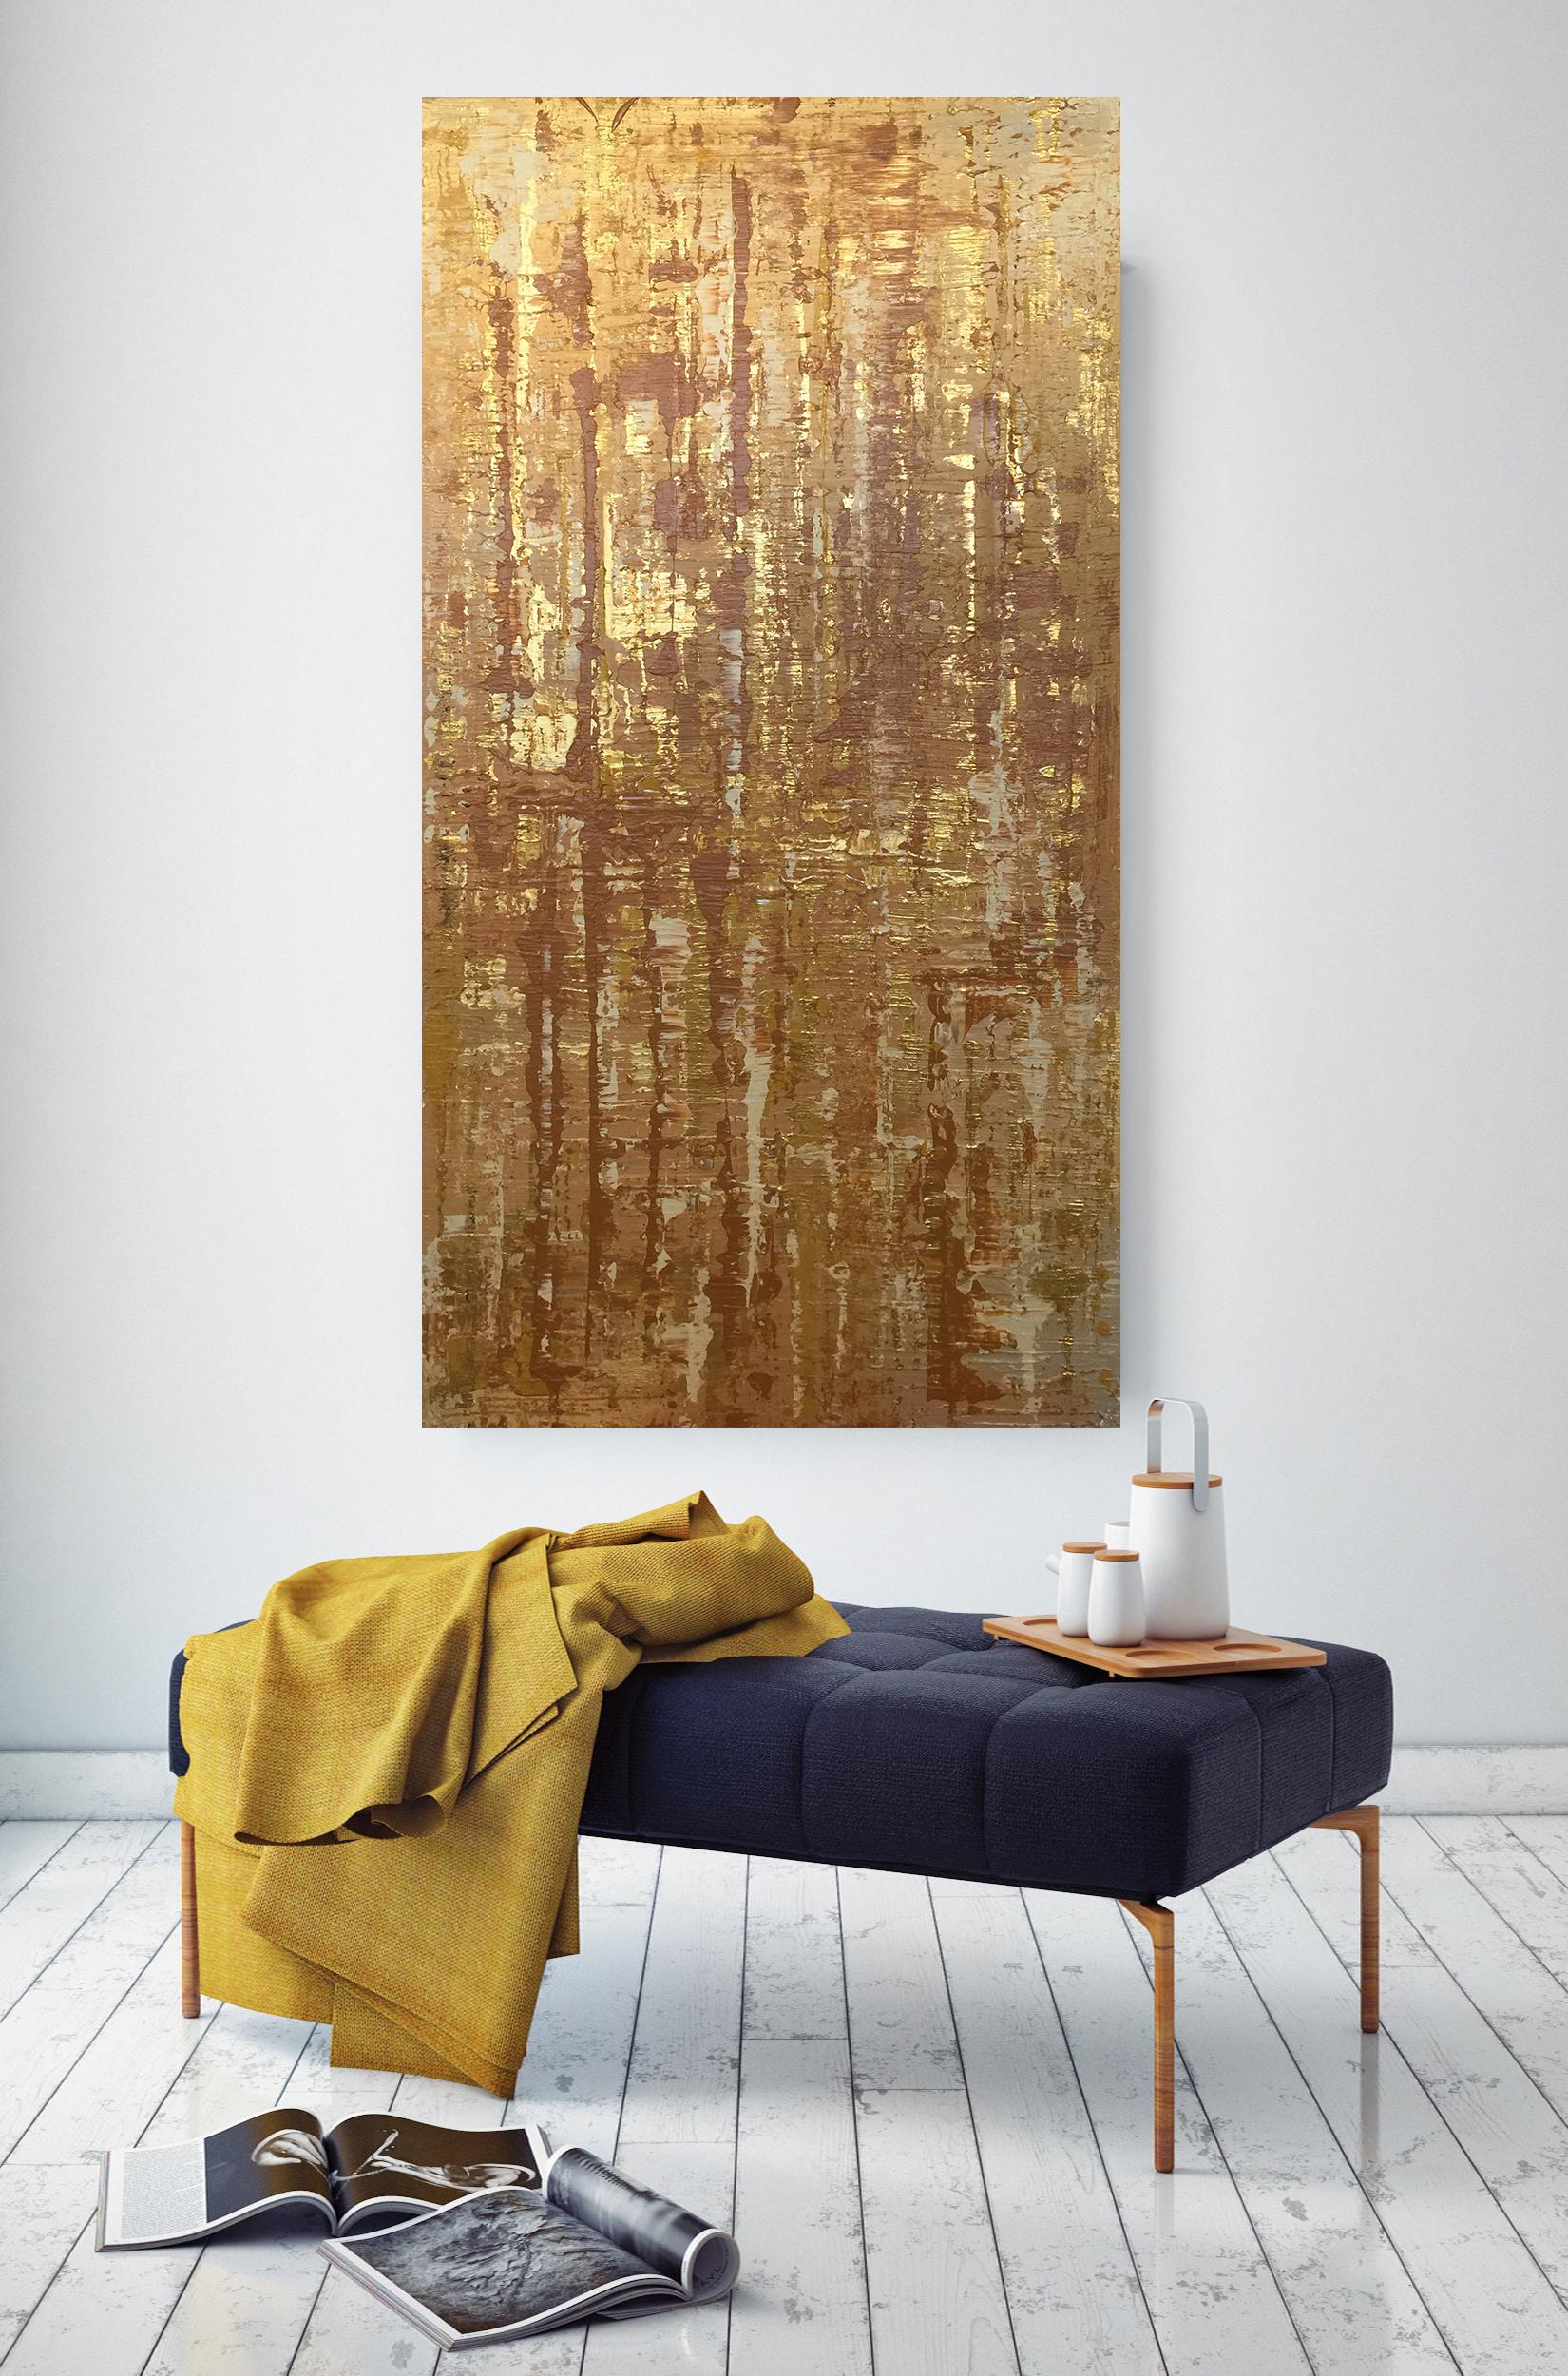 Irena Orlov Interior Painting – Mixed Media on Canvas: Acrylic, Stucco, Modeling Paste Heavy Texture Gold Water